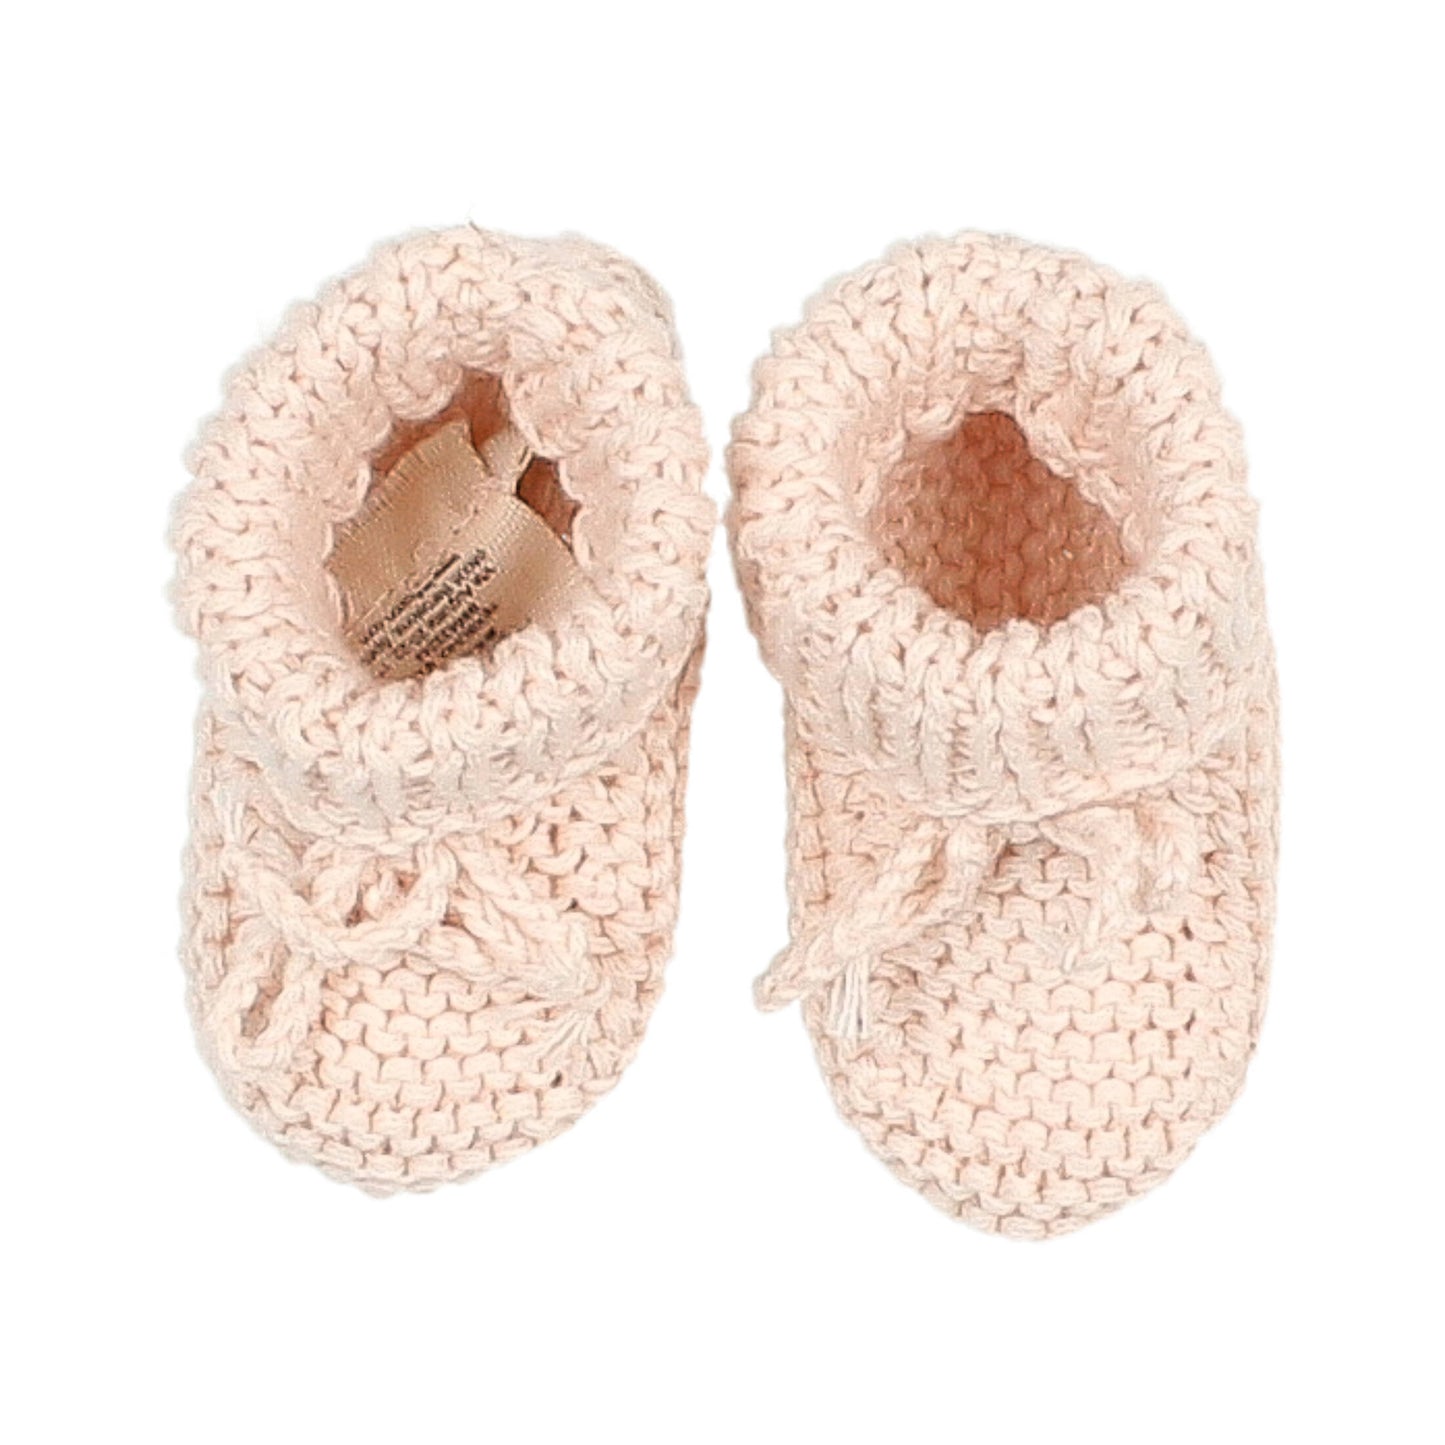 Knit Booties in Light Pink